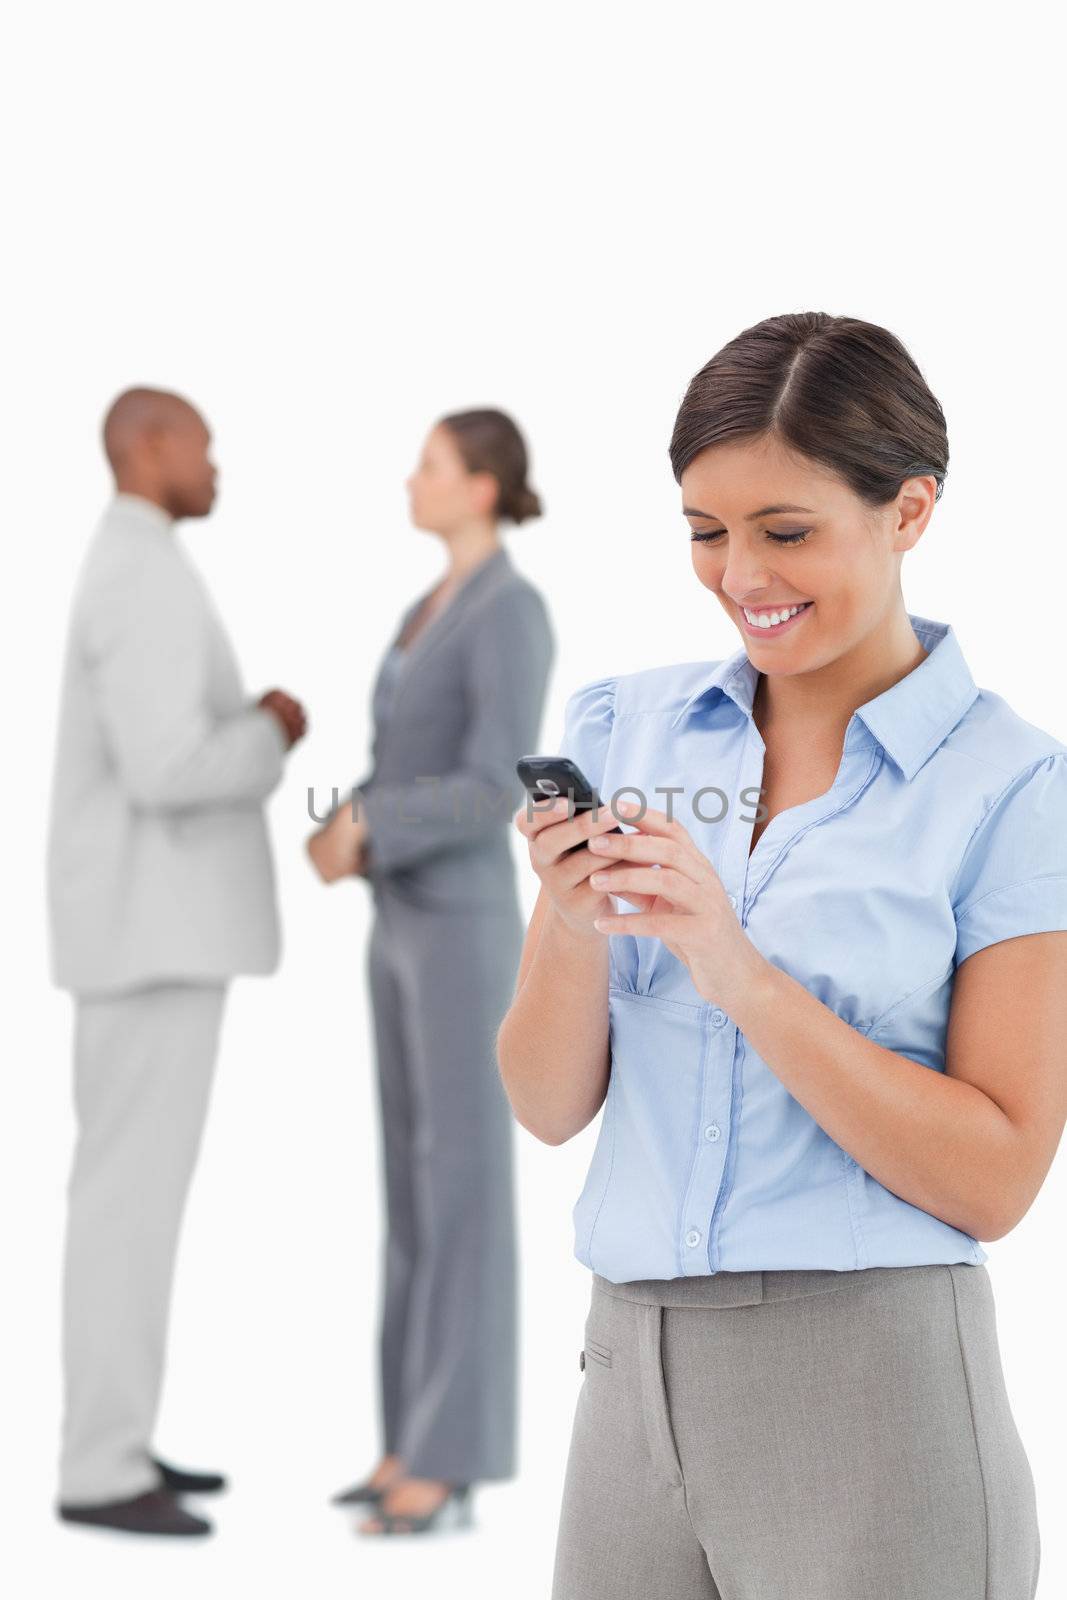 Businesswoman looking at cellphone with associates behind her against a white background